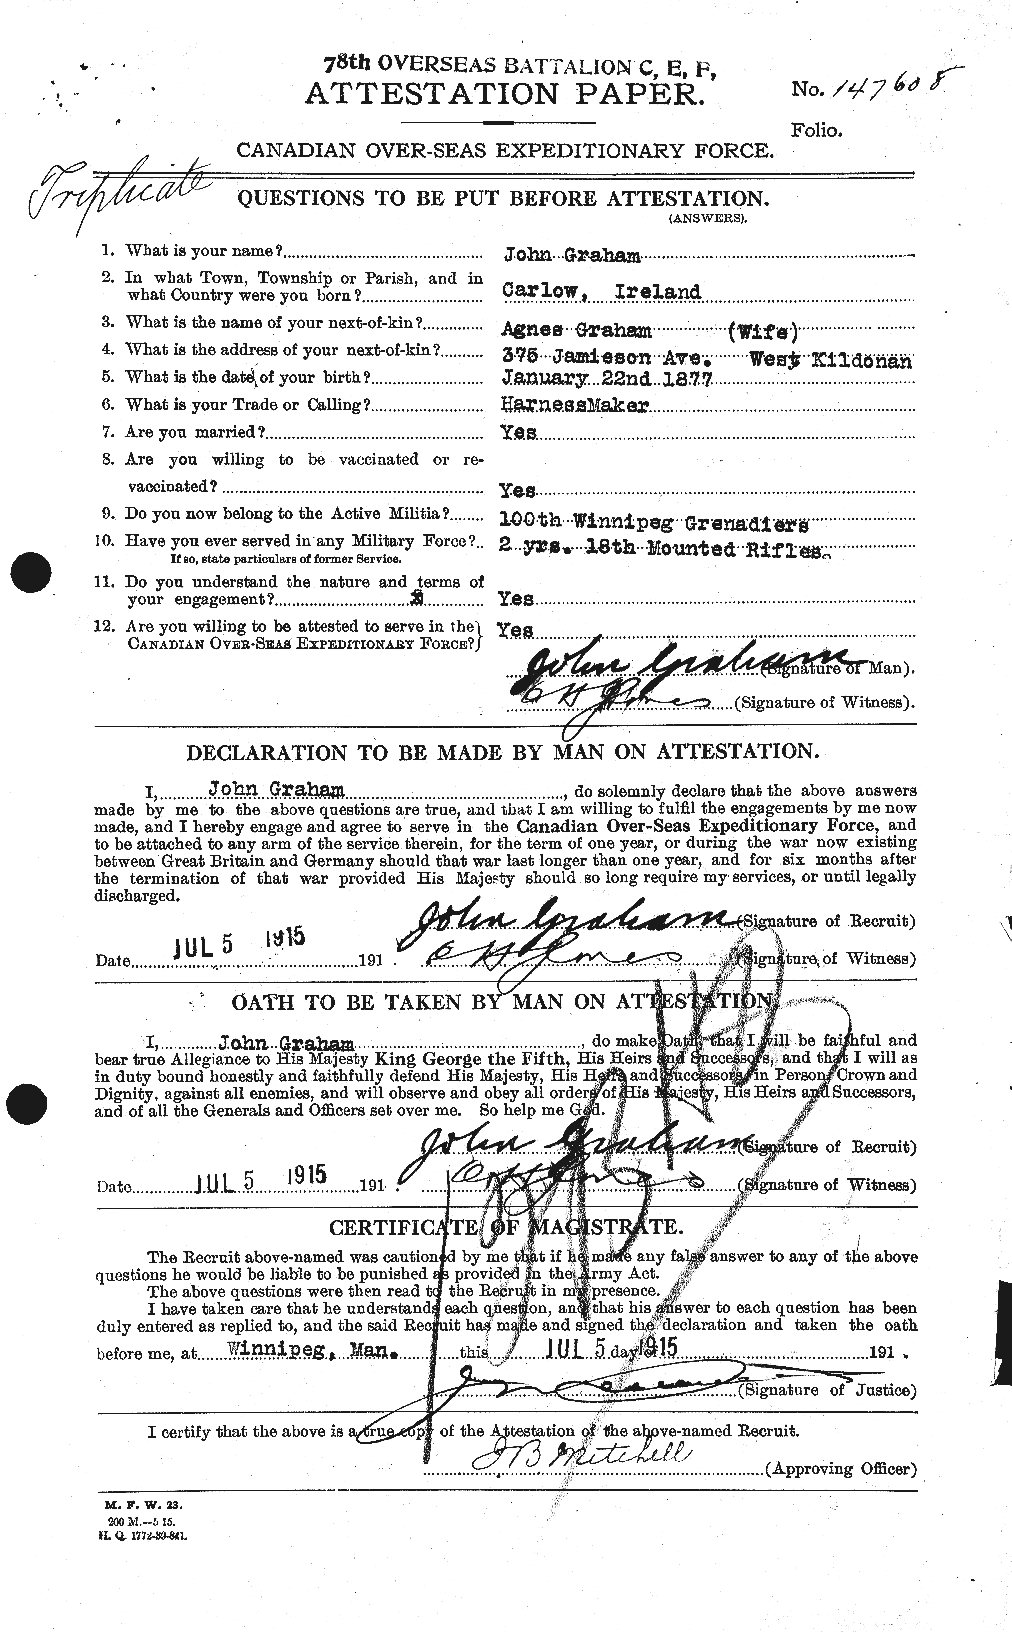 Personnel Records of the First World War - CEF 359149a